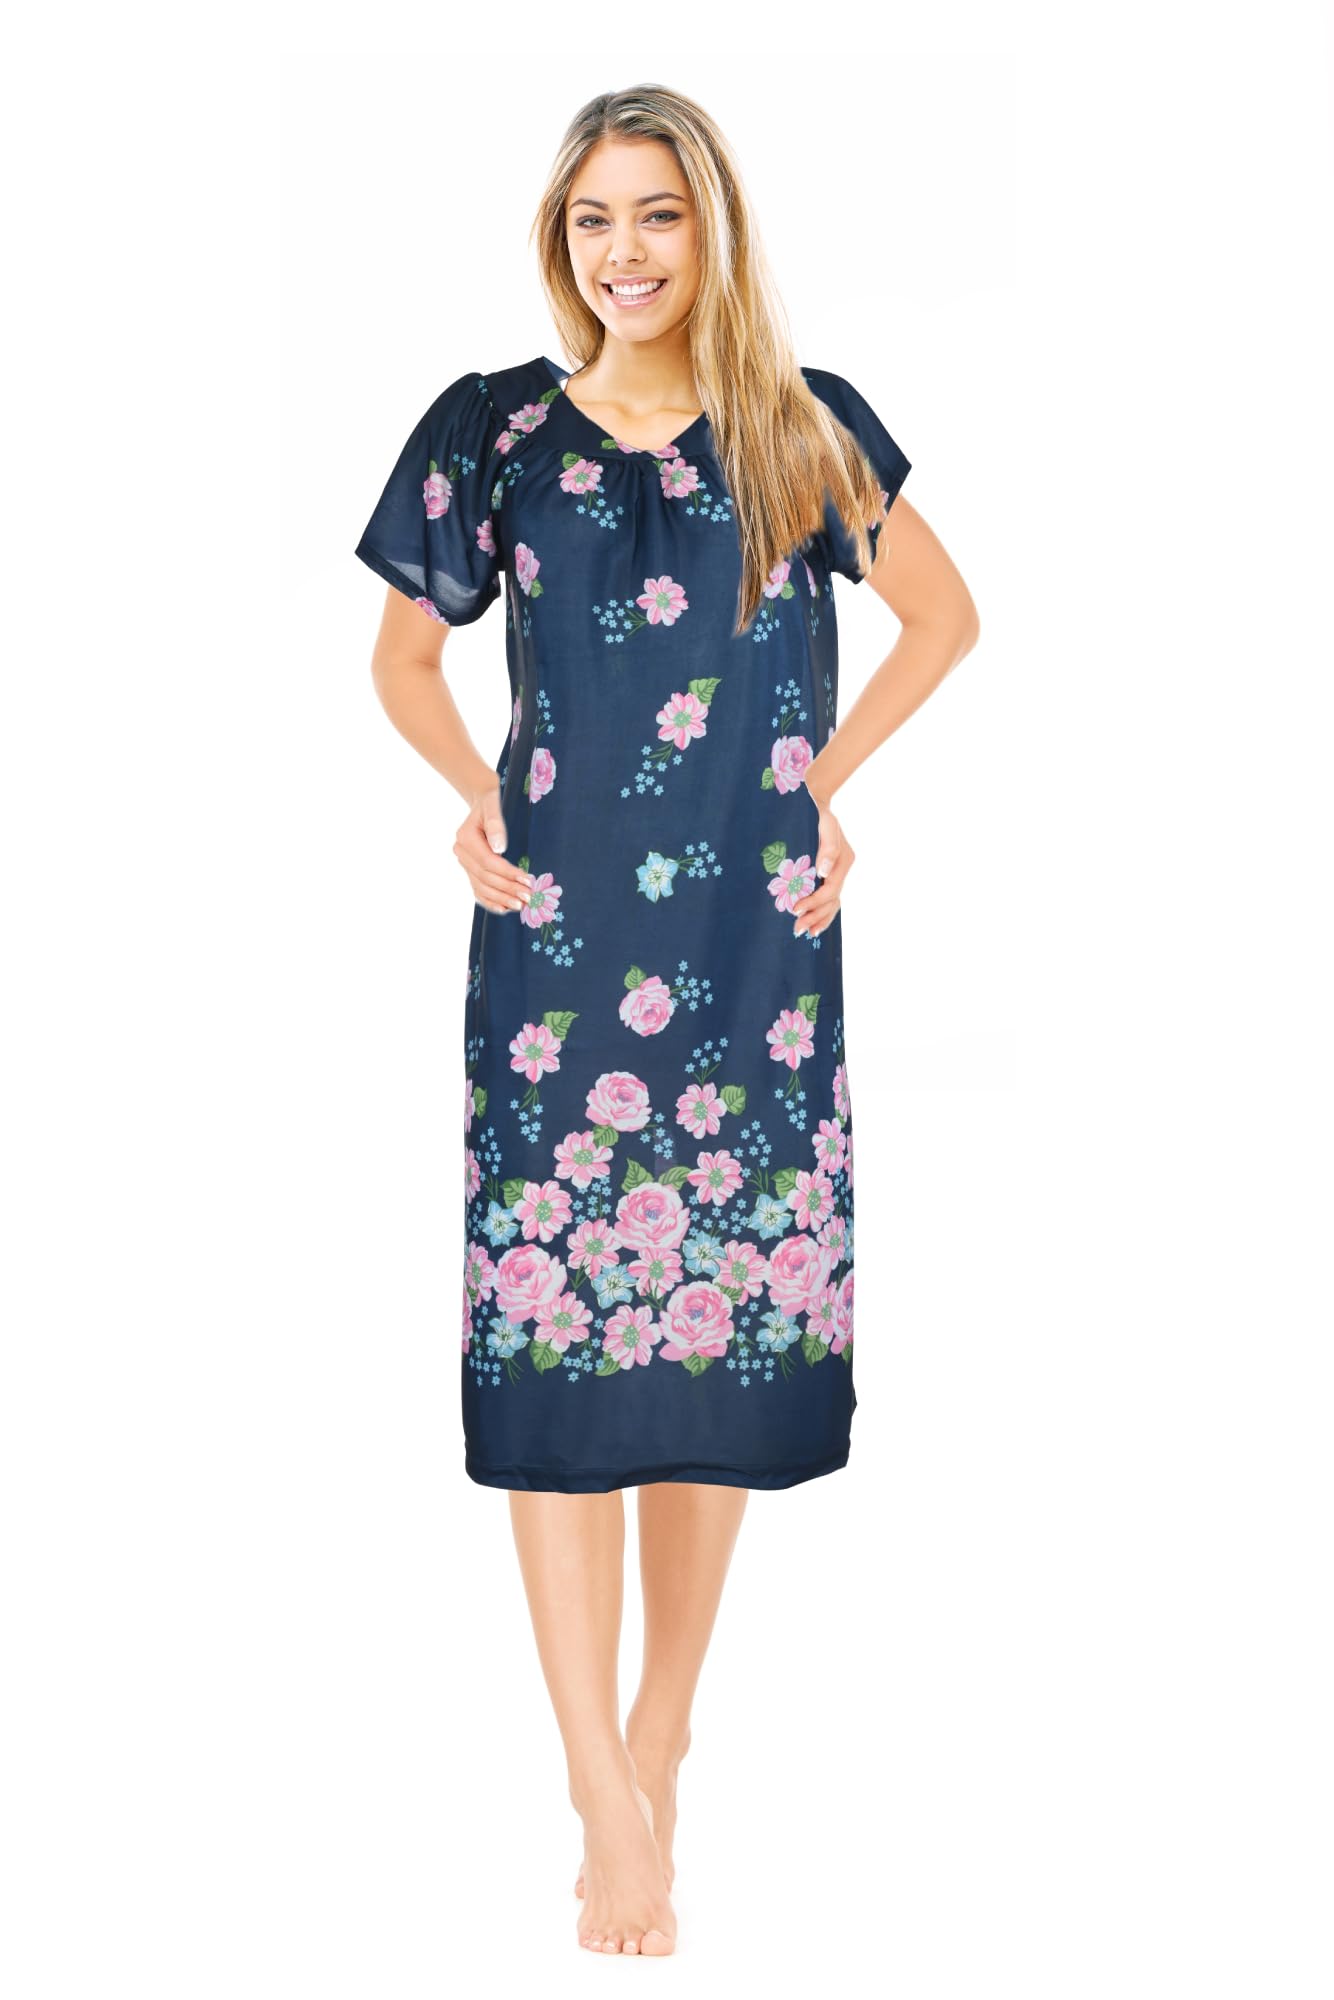 Plus Size Nightgowns for Women Soft Cotton Sleepwear Floral House